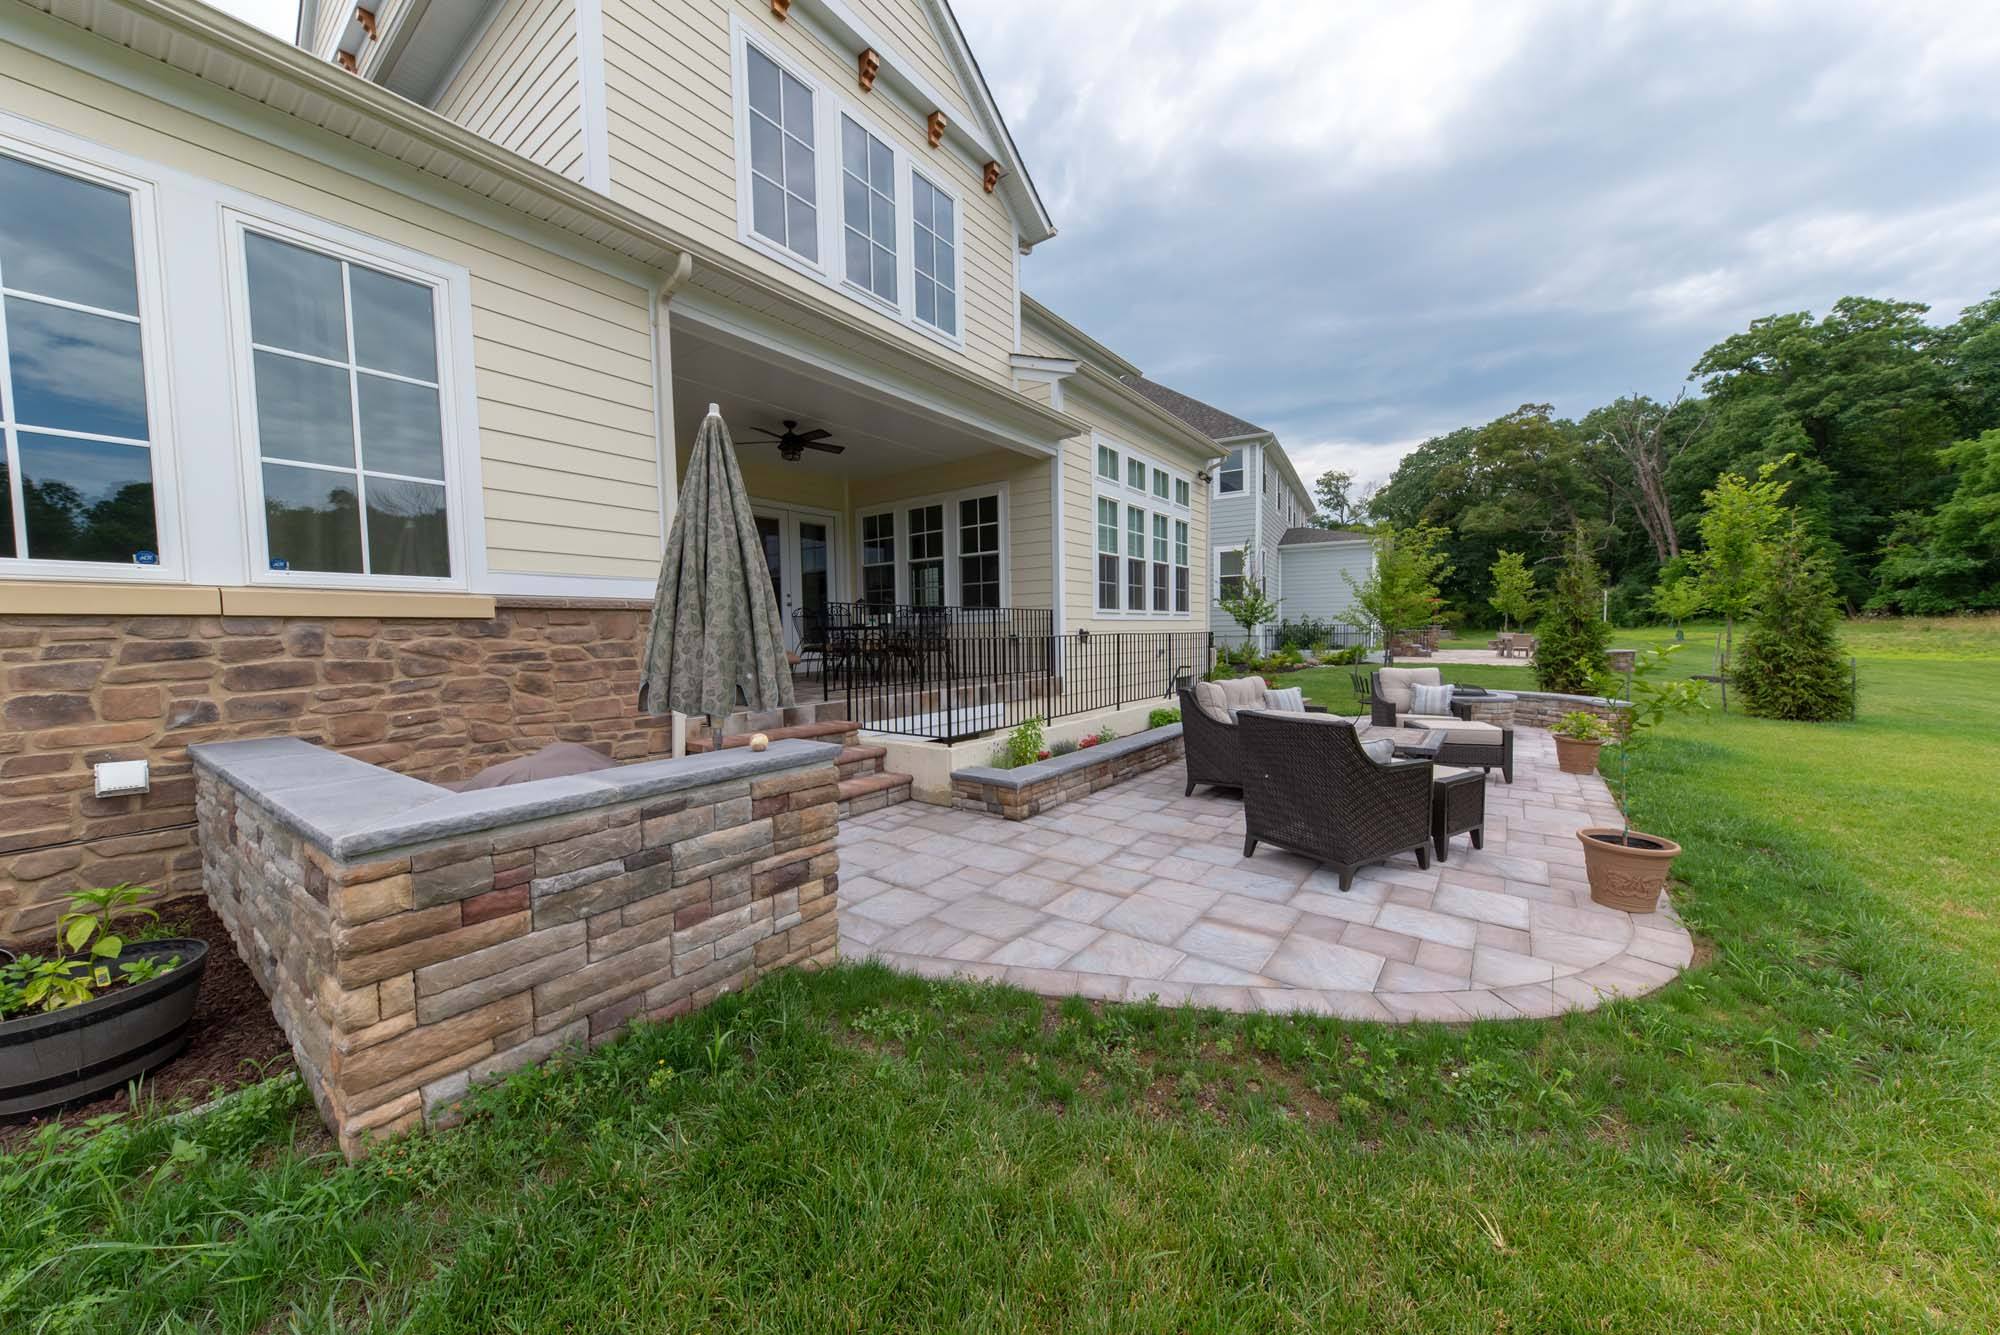 Top Tips and Tricks for Paver Patios to Keep Them Looking